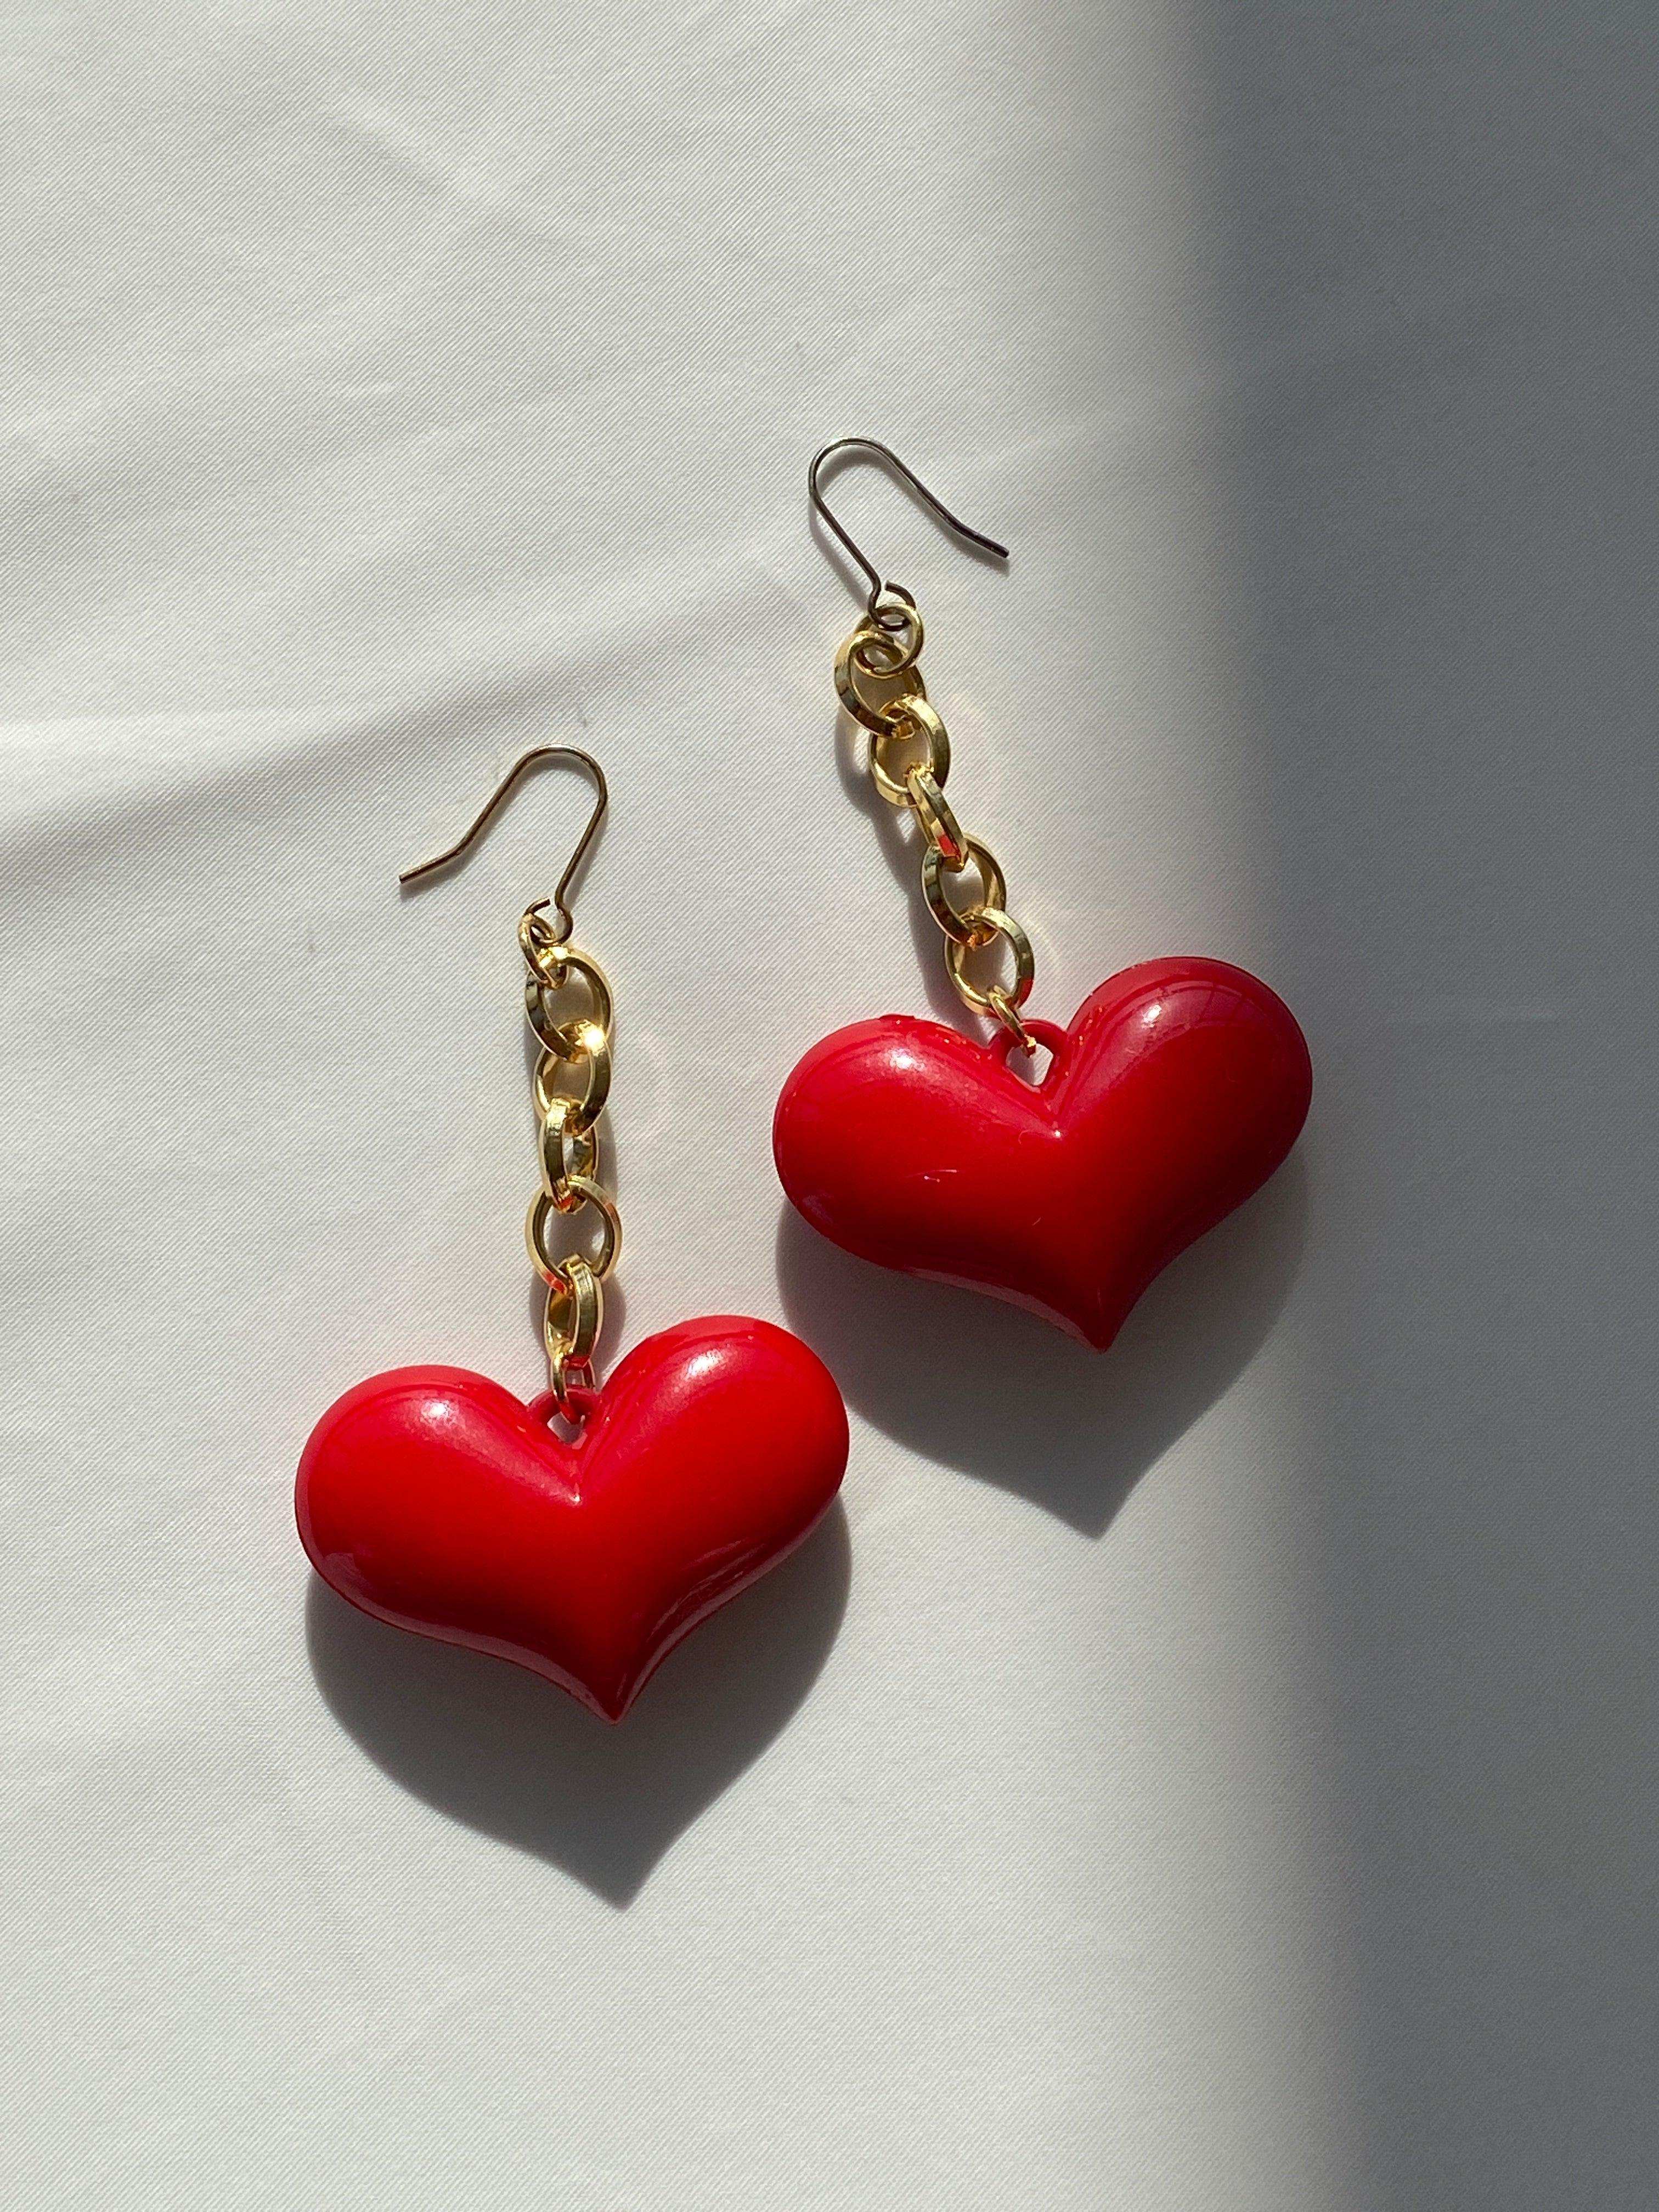 90s Chunky Red Heart Shaped Clip On Earrings - Gold with Red